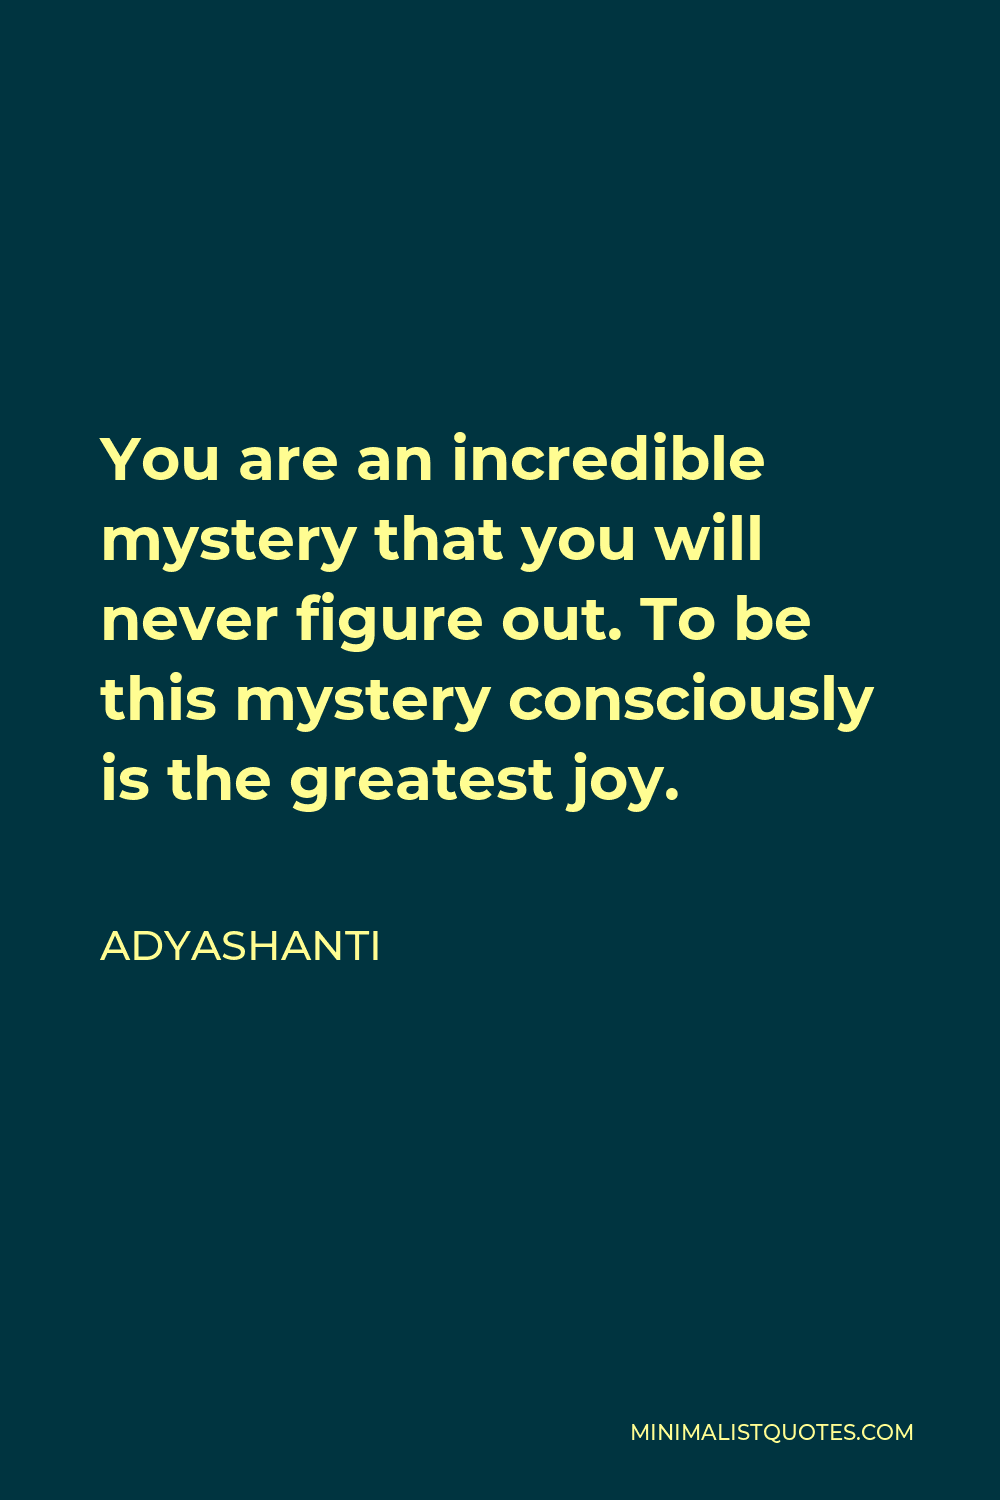 Adyashanti Quote - You are an incredible mystery that you will never figure out. To be this mystery consciously is the greatest joy.